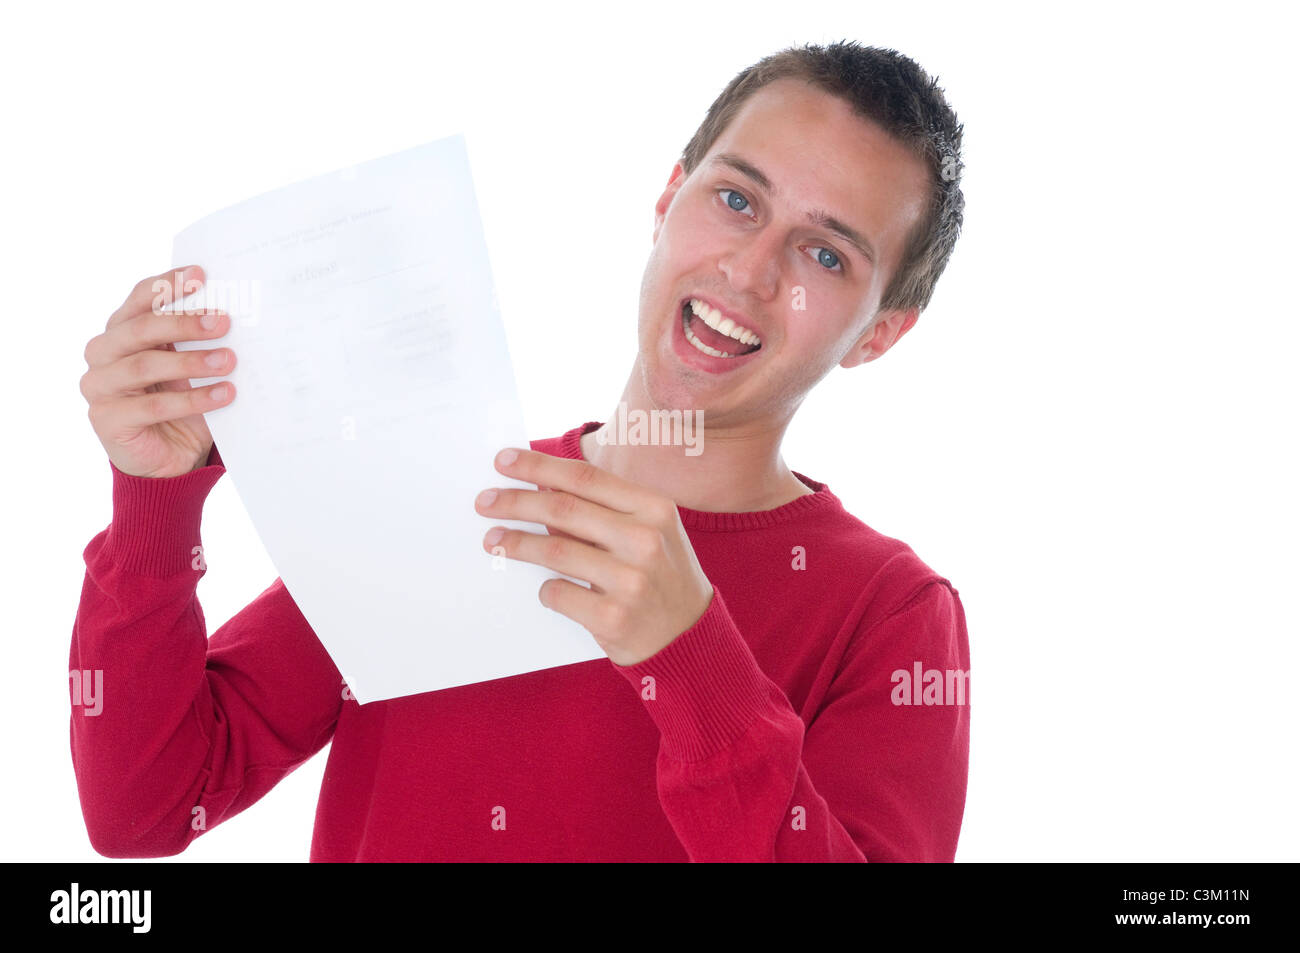 Young man with exam results Stock Photo